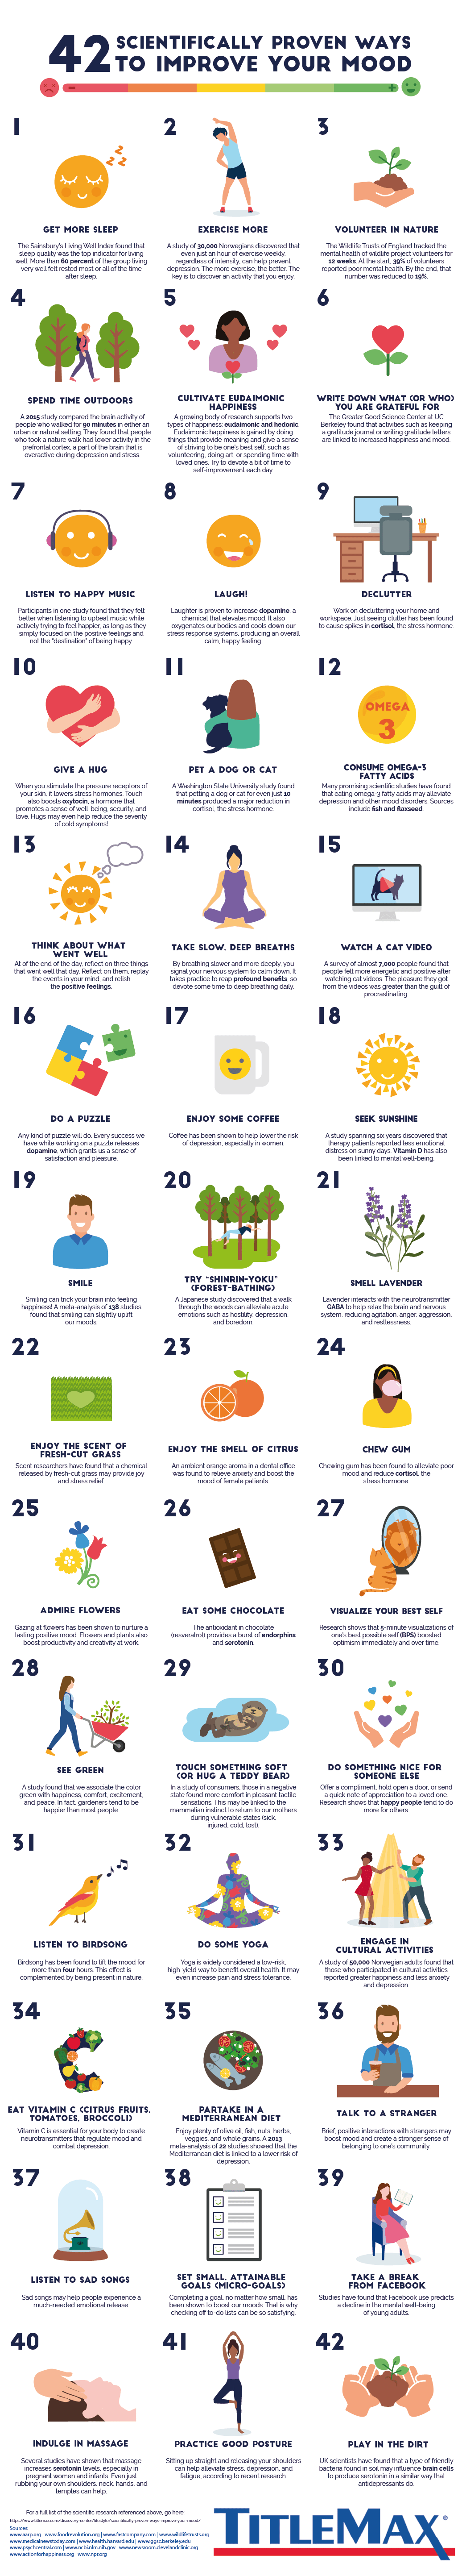 42 Scientifically Proven Ways to Improve Your Mood